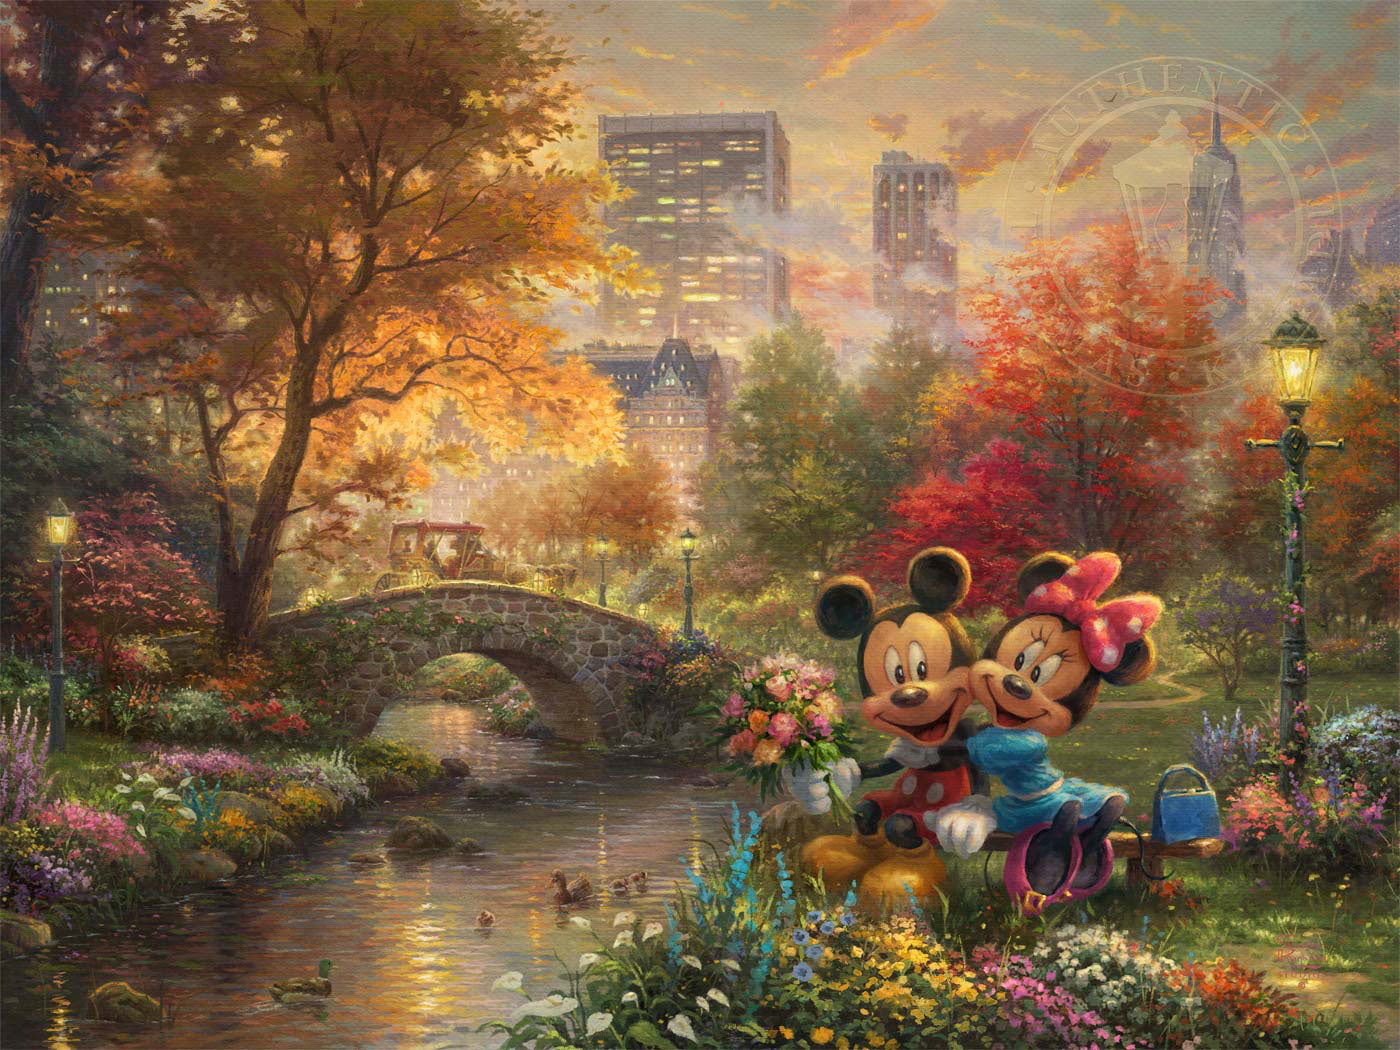 Thomas Kinkade Studios "Mickey and Minnie - Sweetheart Central Park" Limited and Open Canvas Giclee